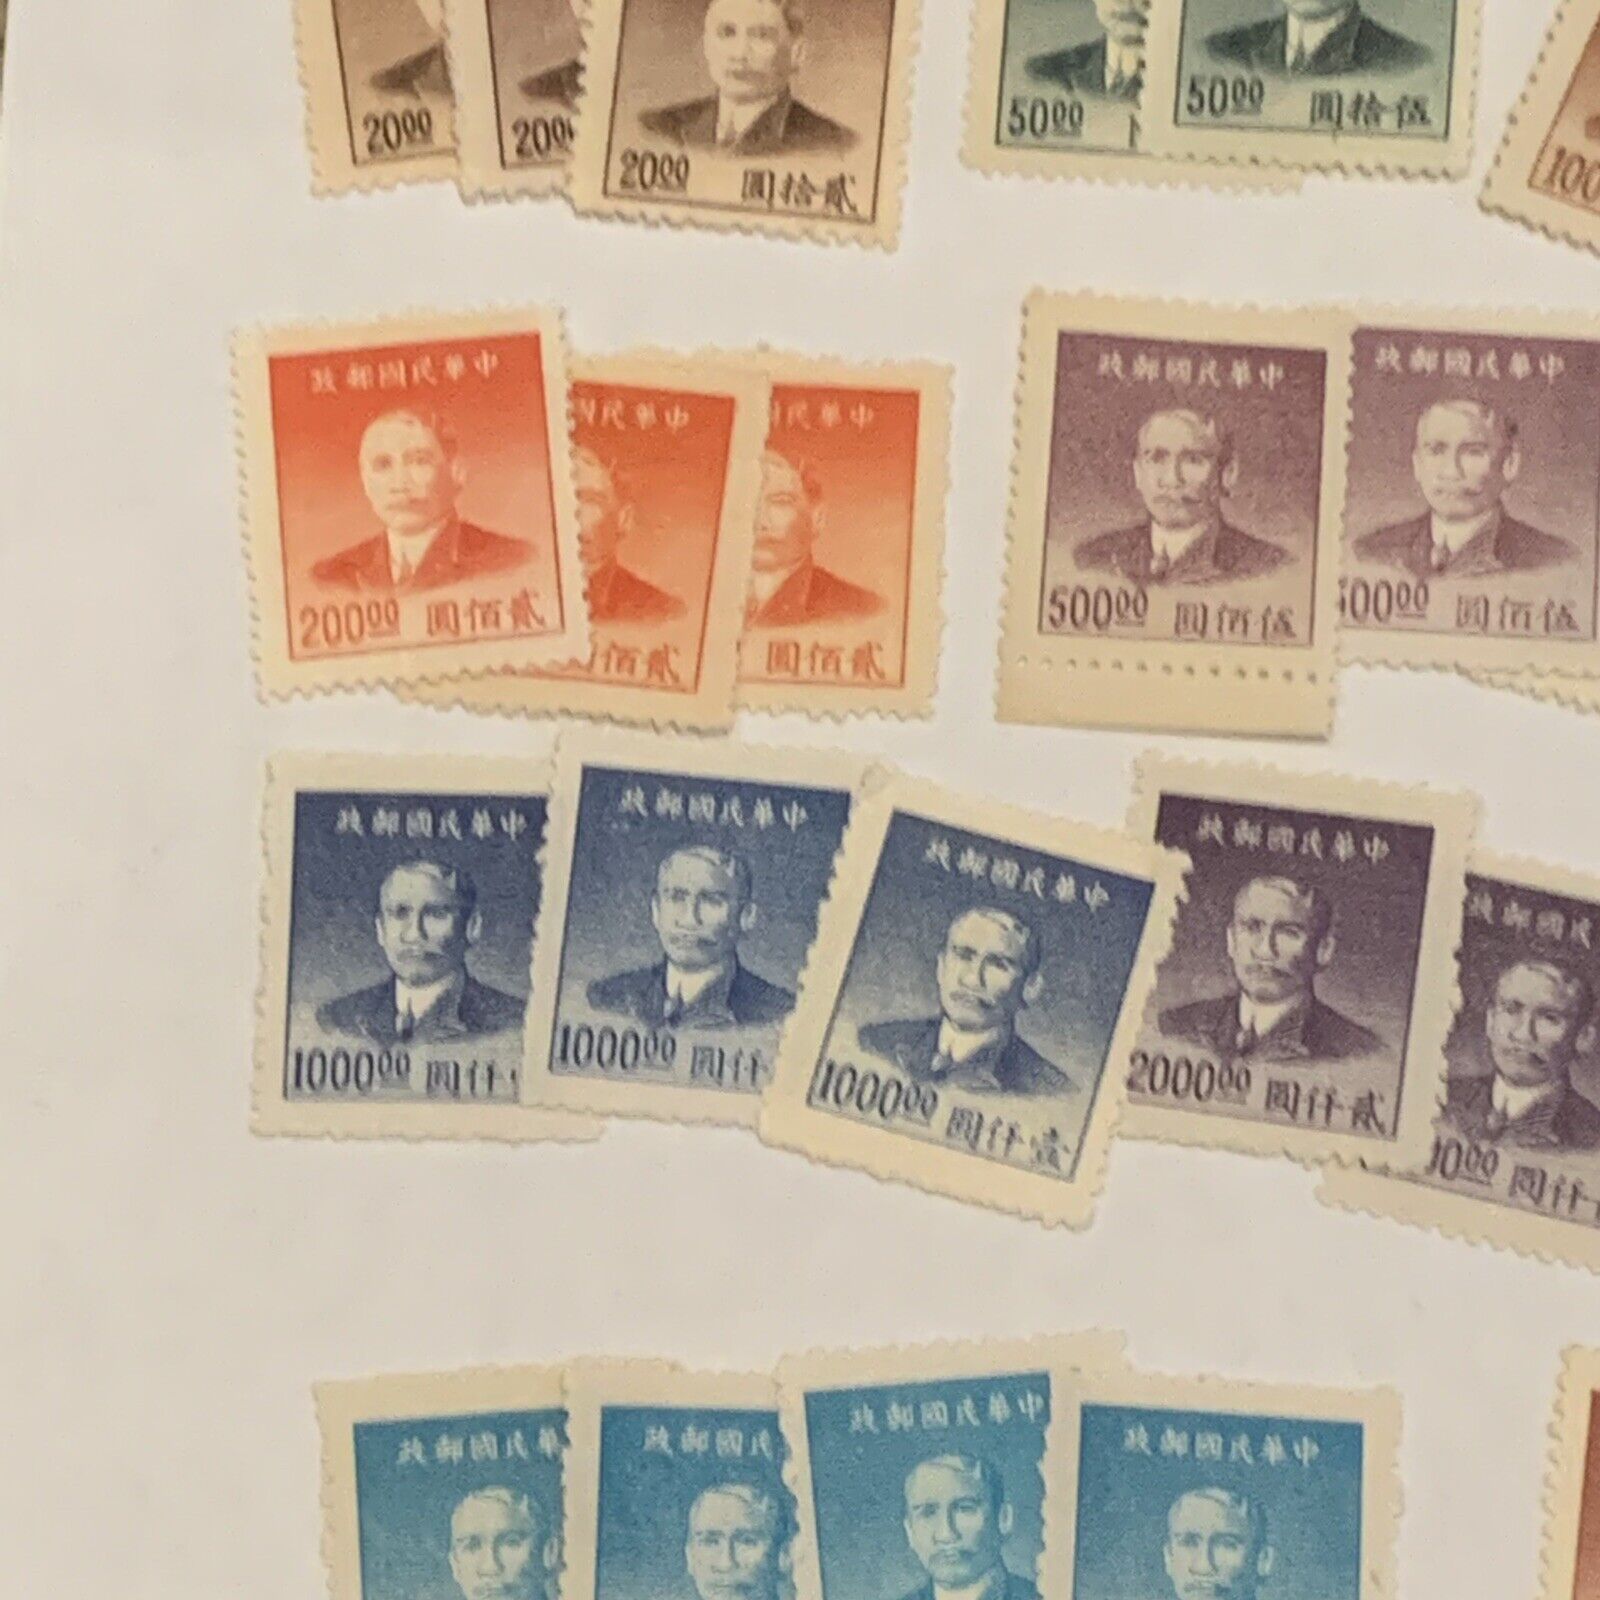 1949 CHINA MINT STAMPS INVESTOR'S LOT SUN YAT-SEN VALUES FROM $1-$50,000